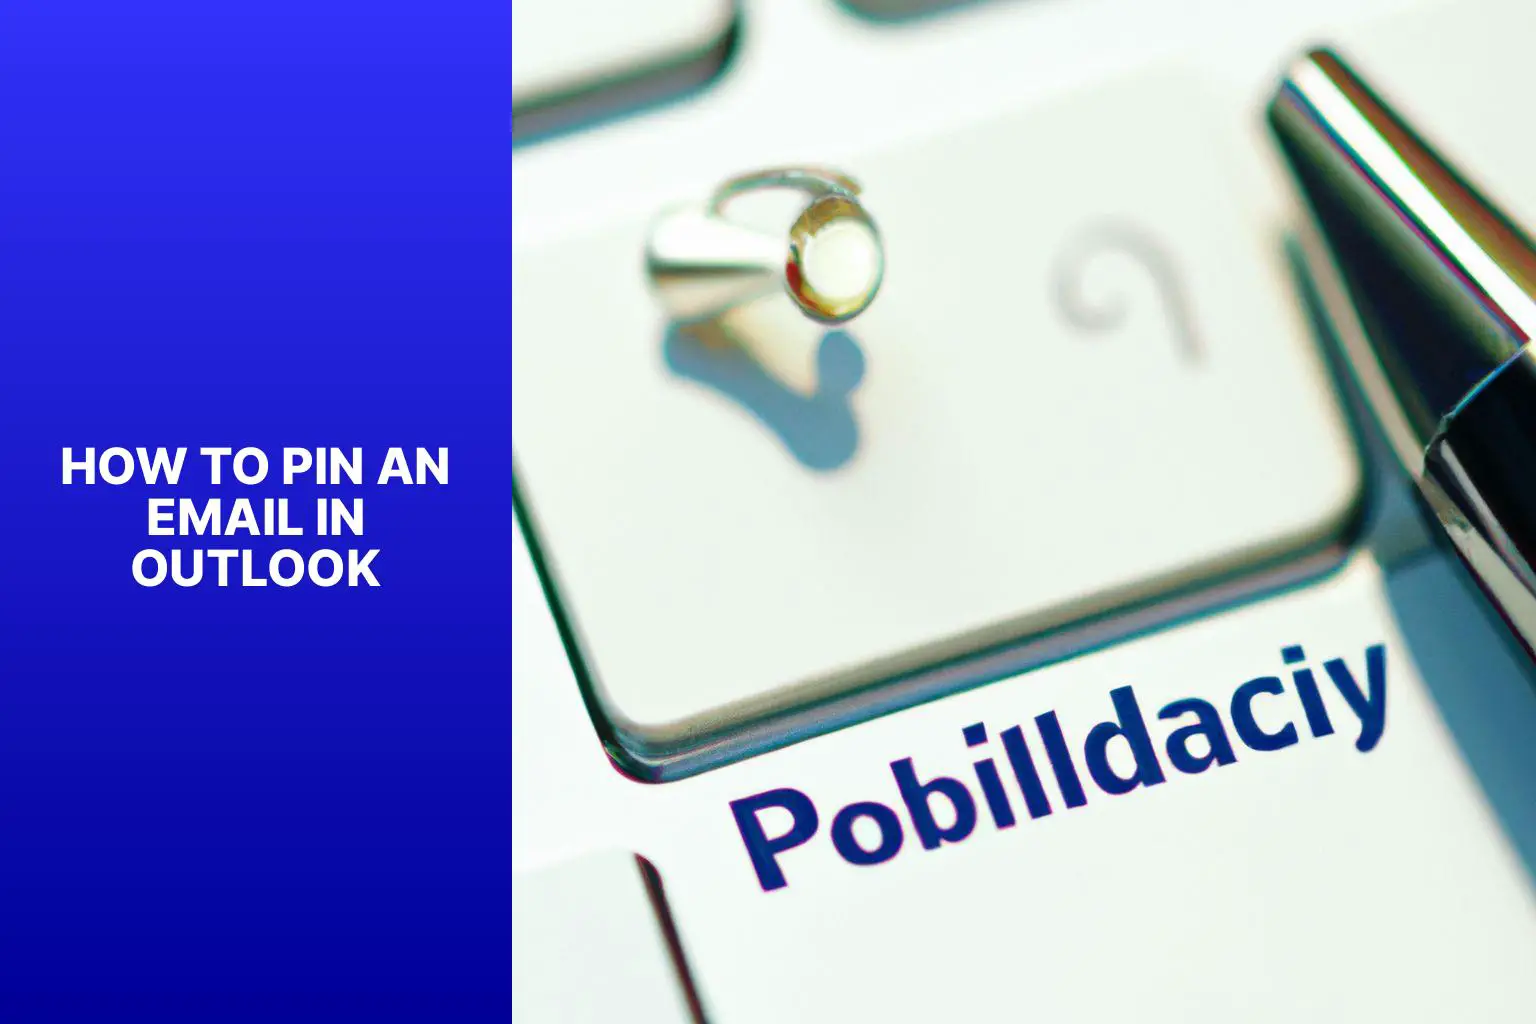 Learn How to Pin an Email in Outlook: Step-by-Step Guide